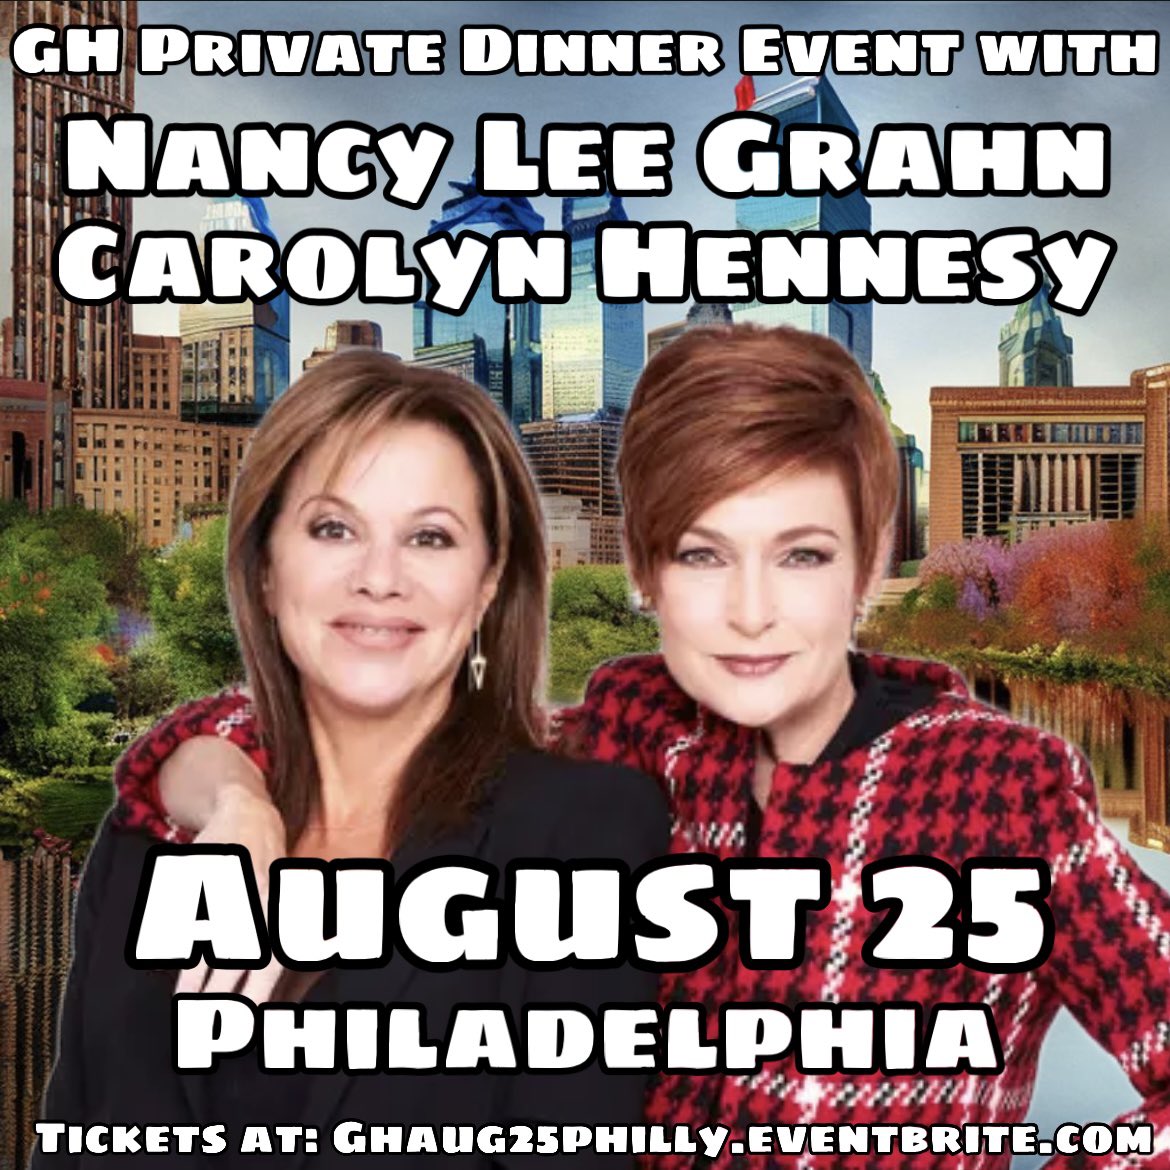 Just announced… @NancyLeeGrahn and @carolynhennesy are hitting the road this Summer! Catch them in #boston #newyork #newjersey and #philadelphia for a meet & greet event or at one of their private dinner events. Tickets now on sale unclevinniescomedyclub.com/comedy-schedul…